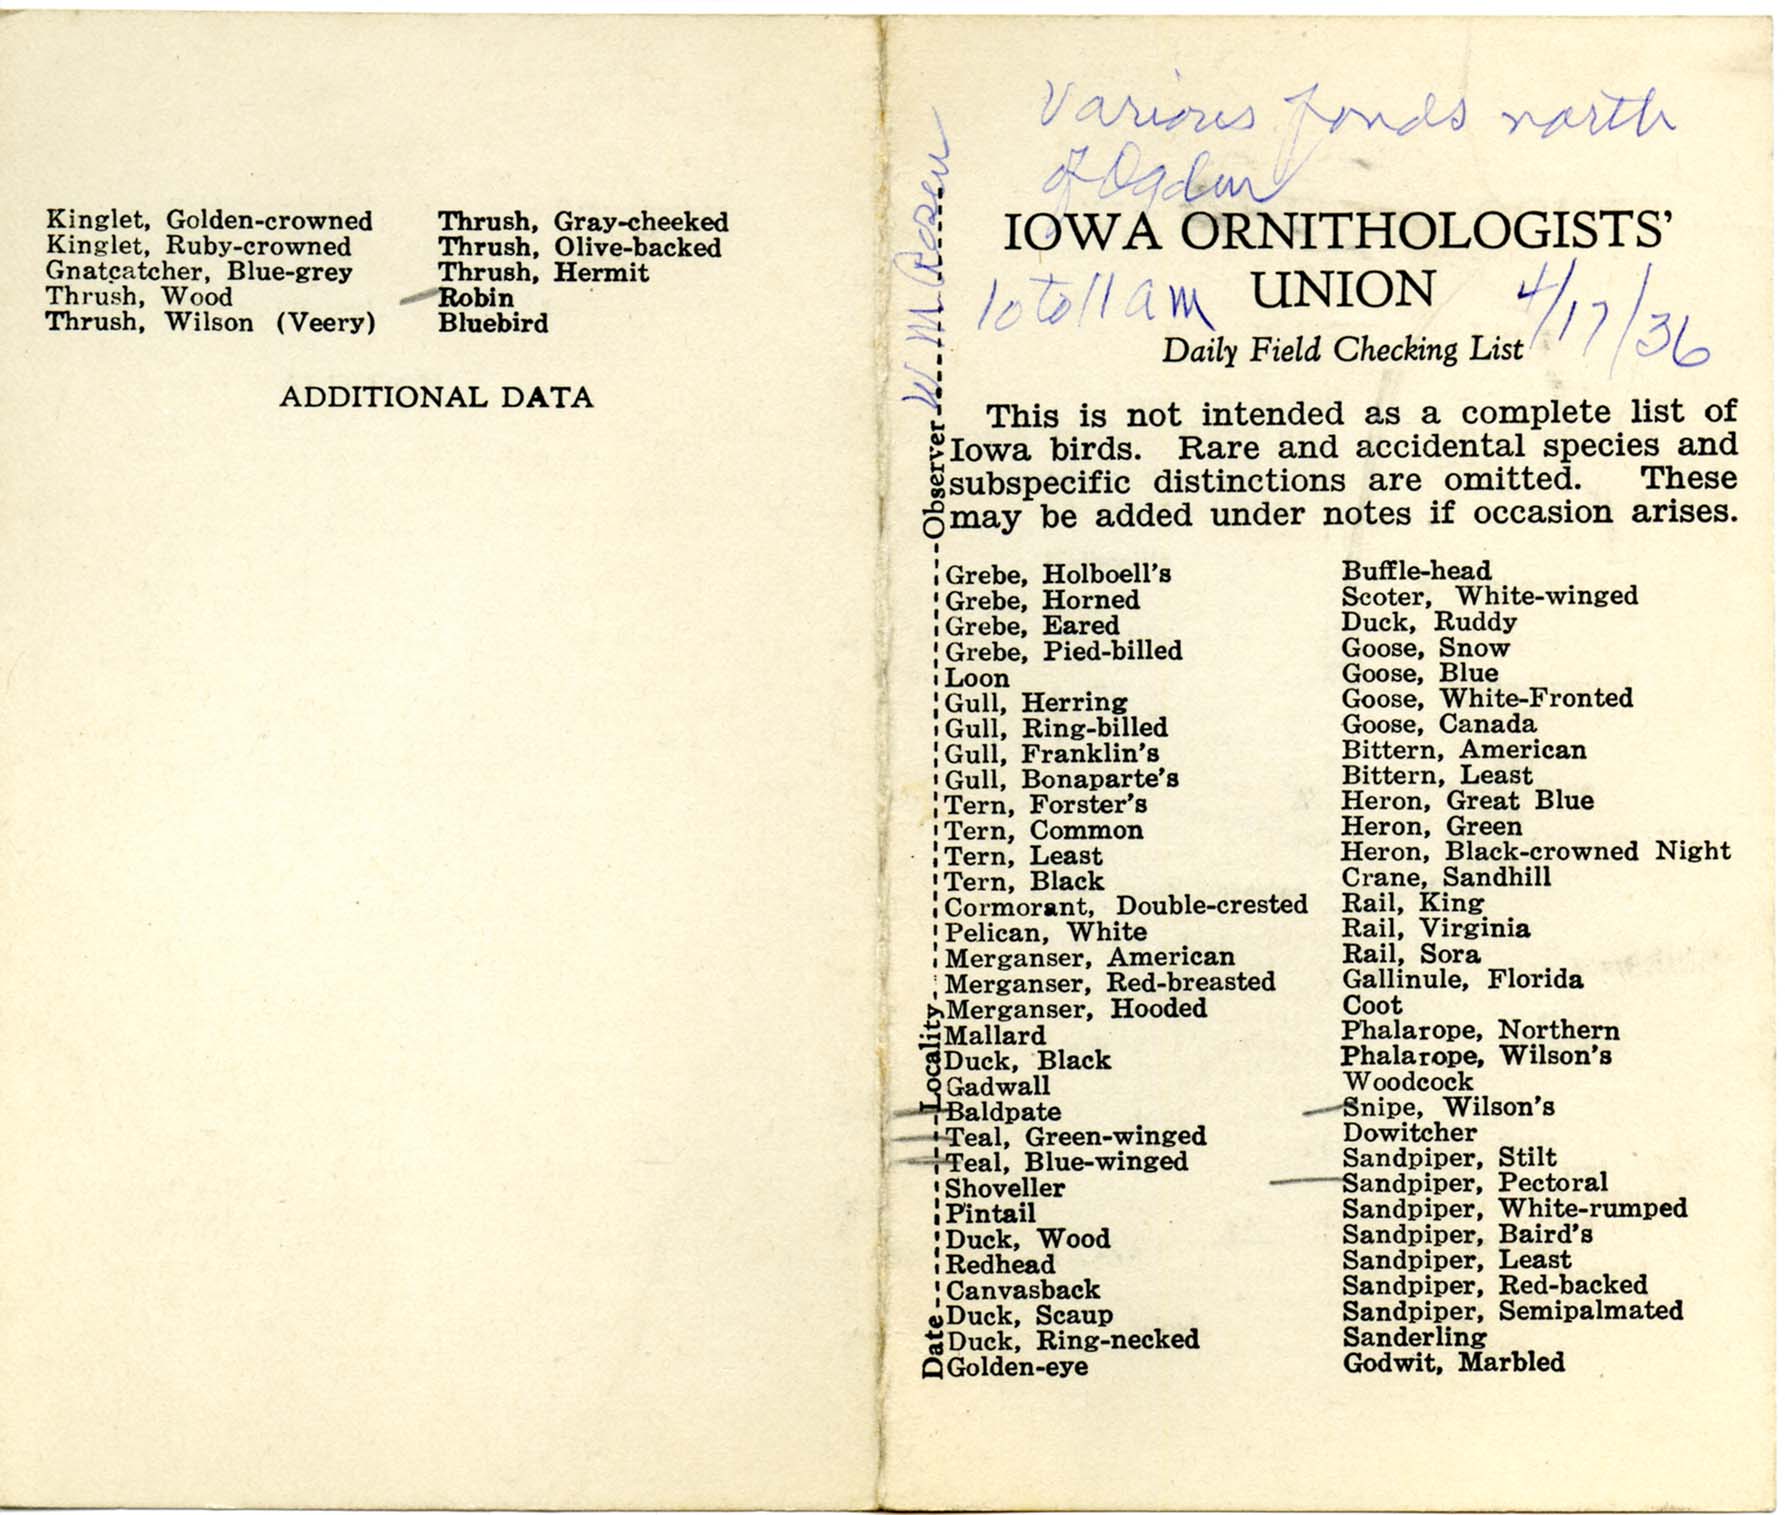 Daily field checking list by Walter Rosene, April 17, 1936